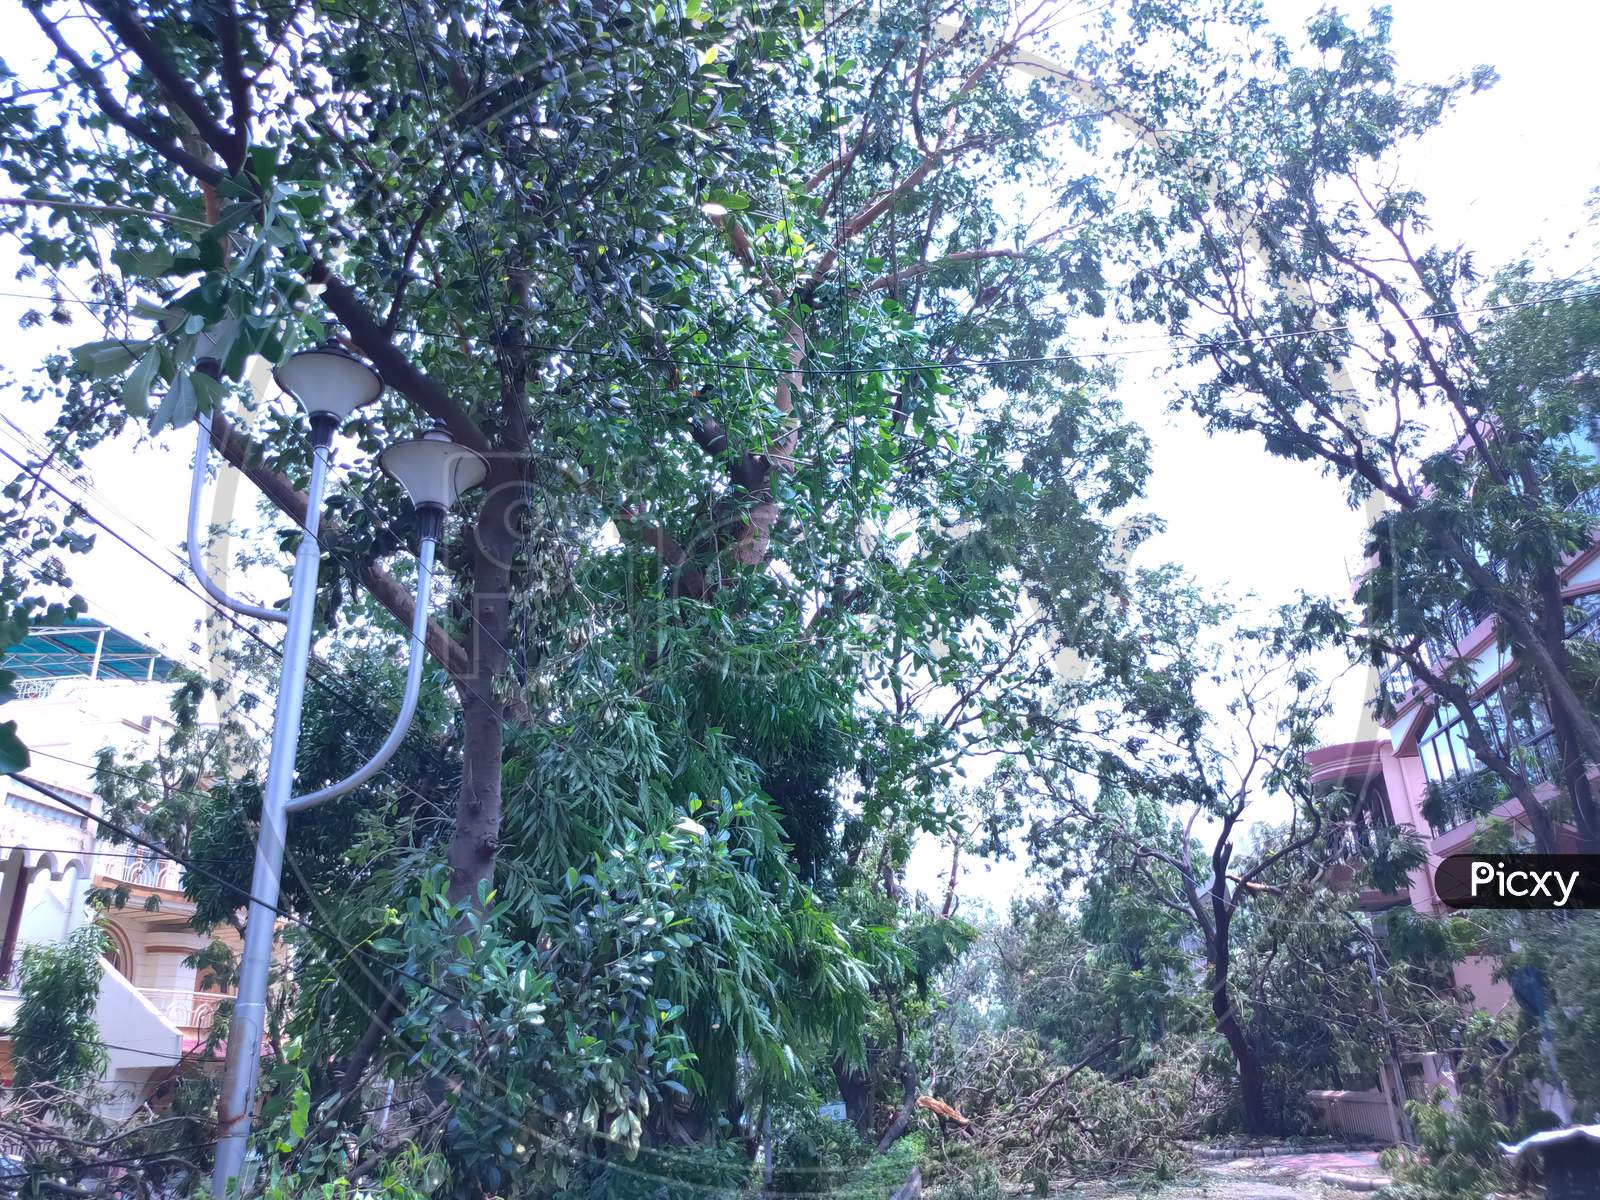 Trees Are Fallen Into The Roadside After Amphan Cyclone